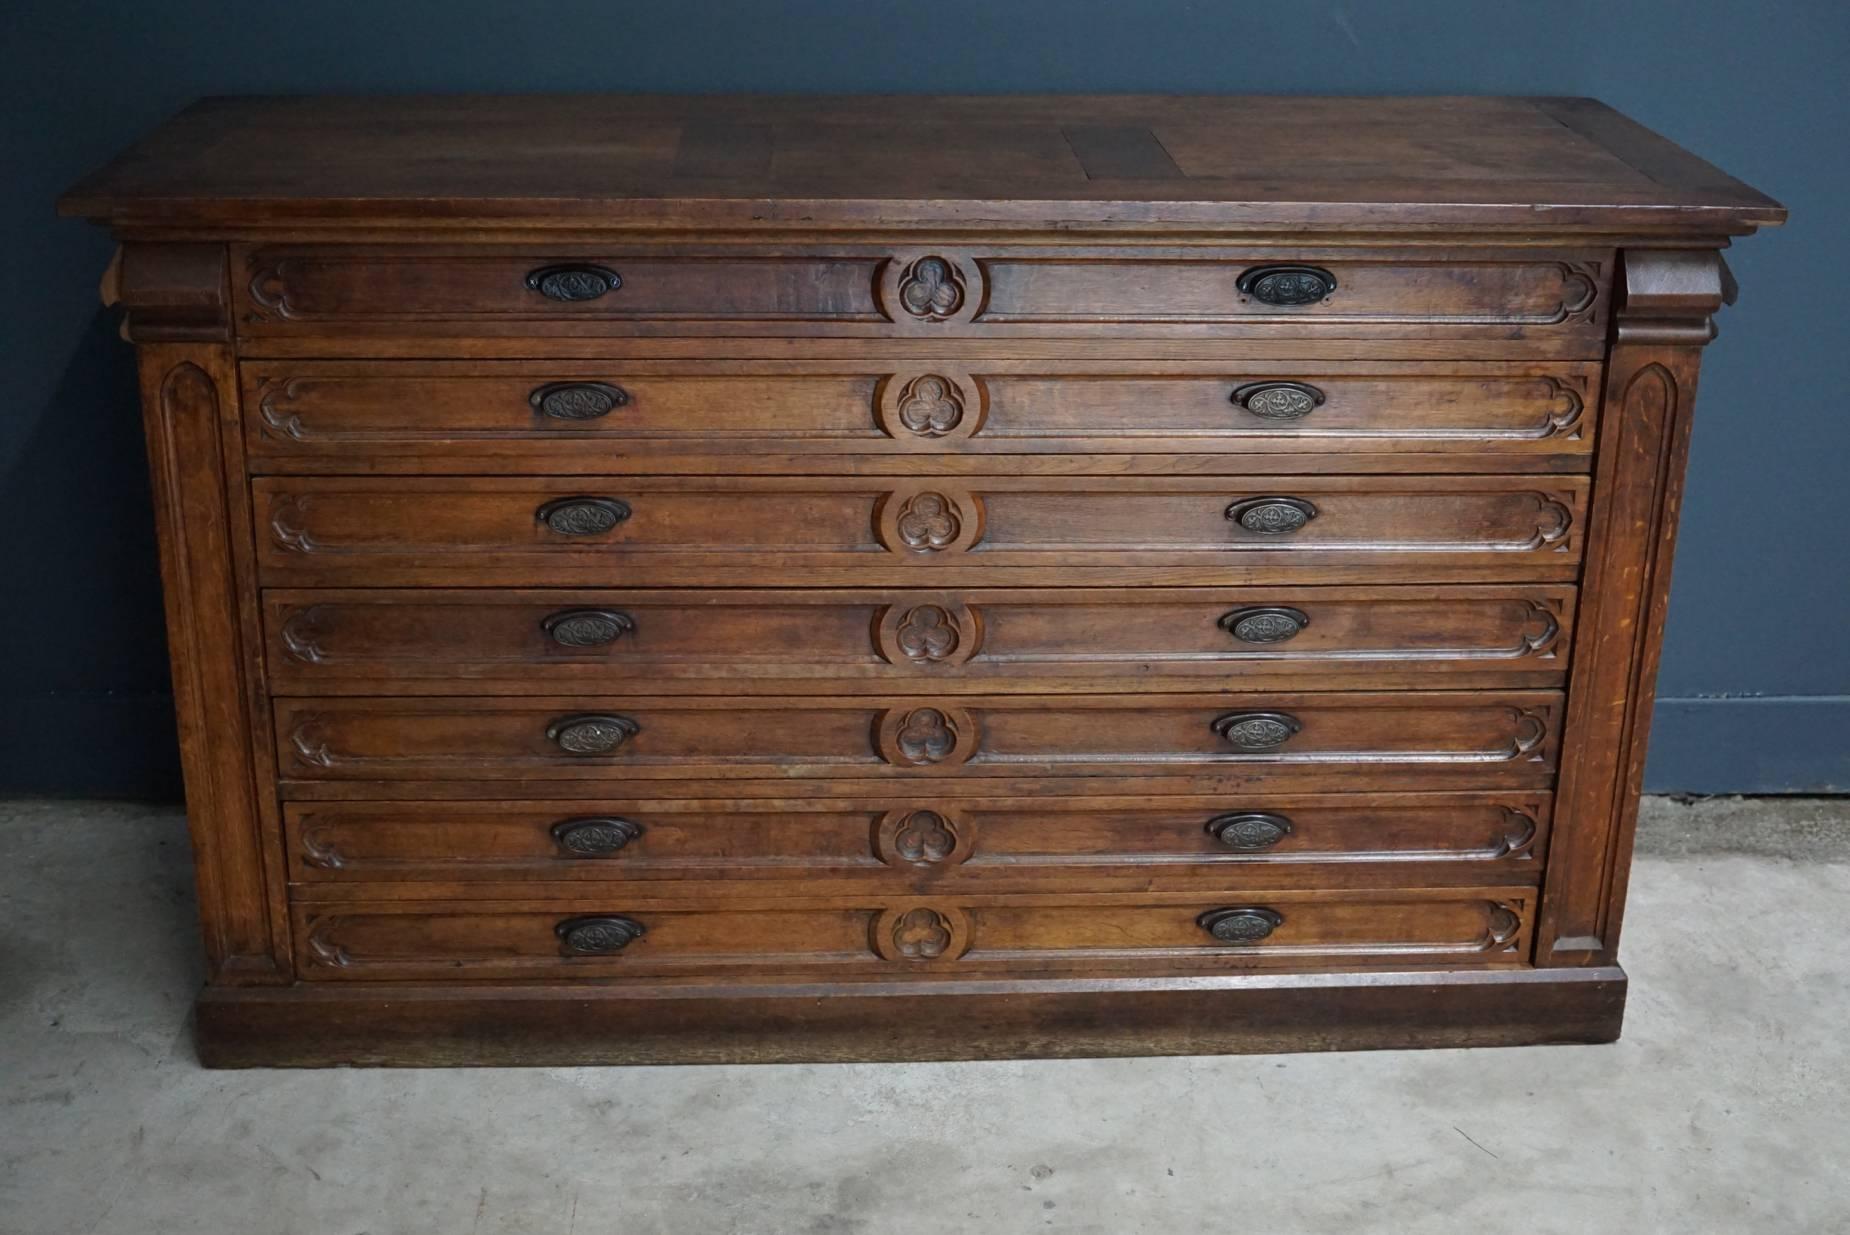 This bank of drawers was designed and made in the late 19th century in France to be used in a church. The piece is made from oak with cast iron hardware.